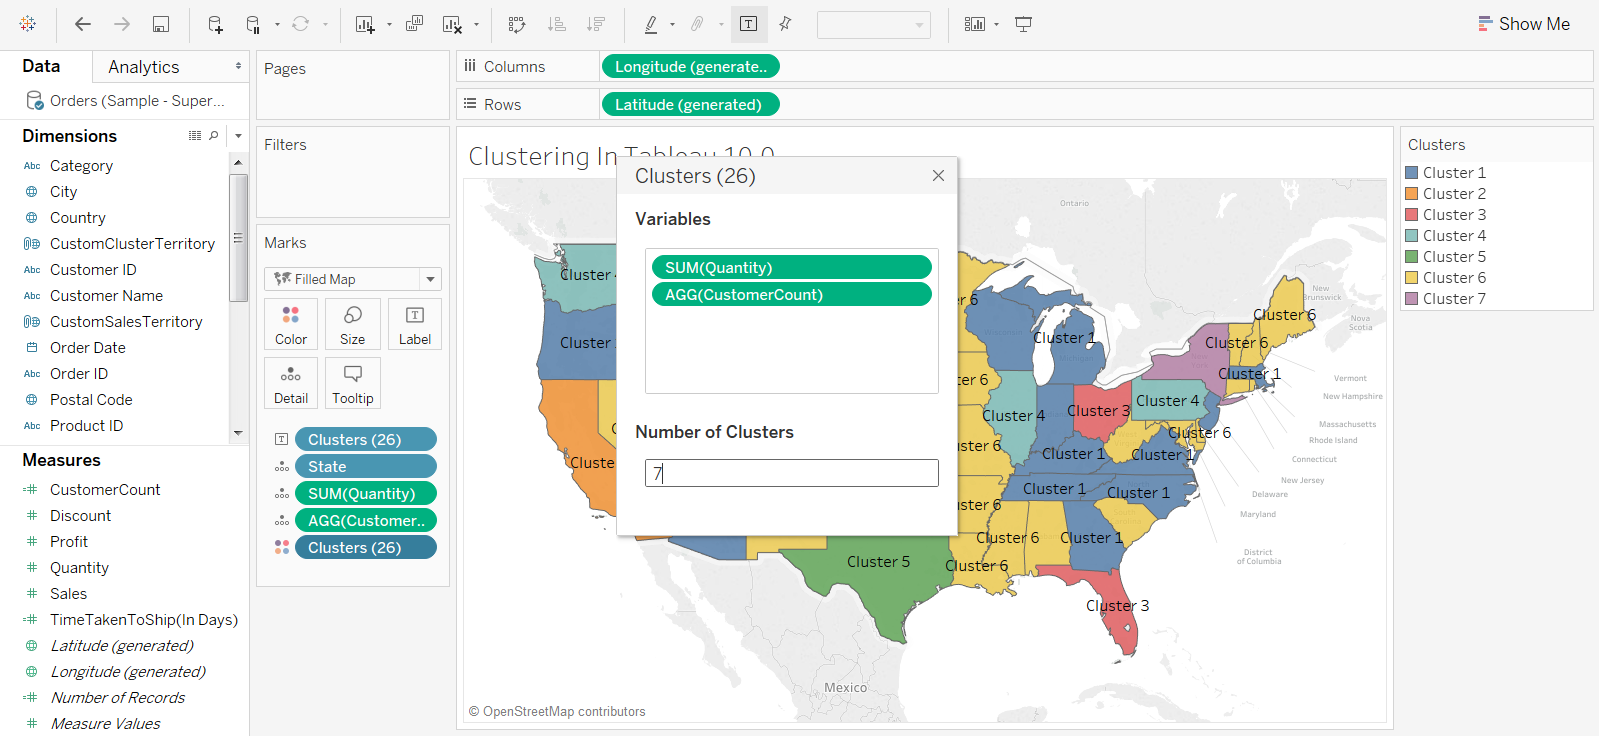 K-means Clustering in Tableau  & Visualizing Custom Sales territory based on the Analysis 38